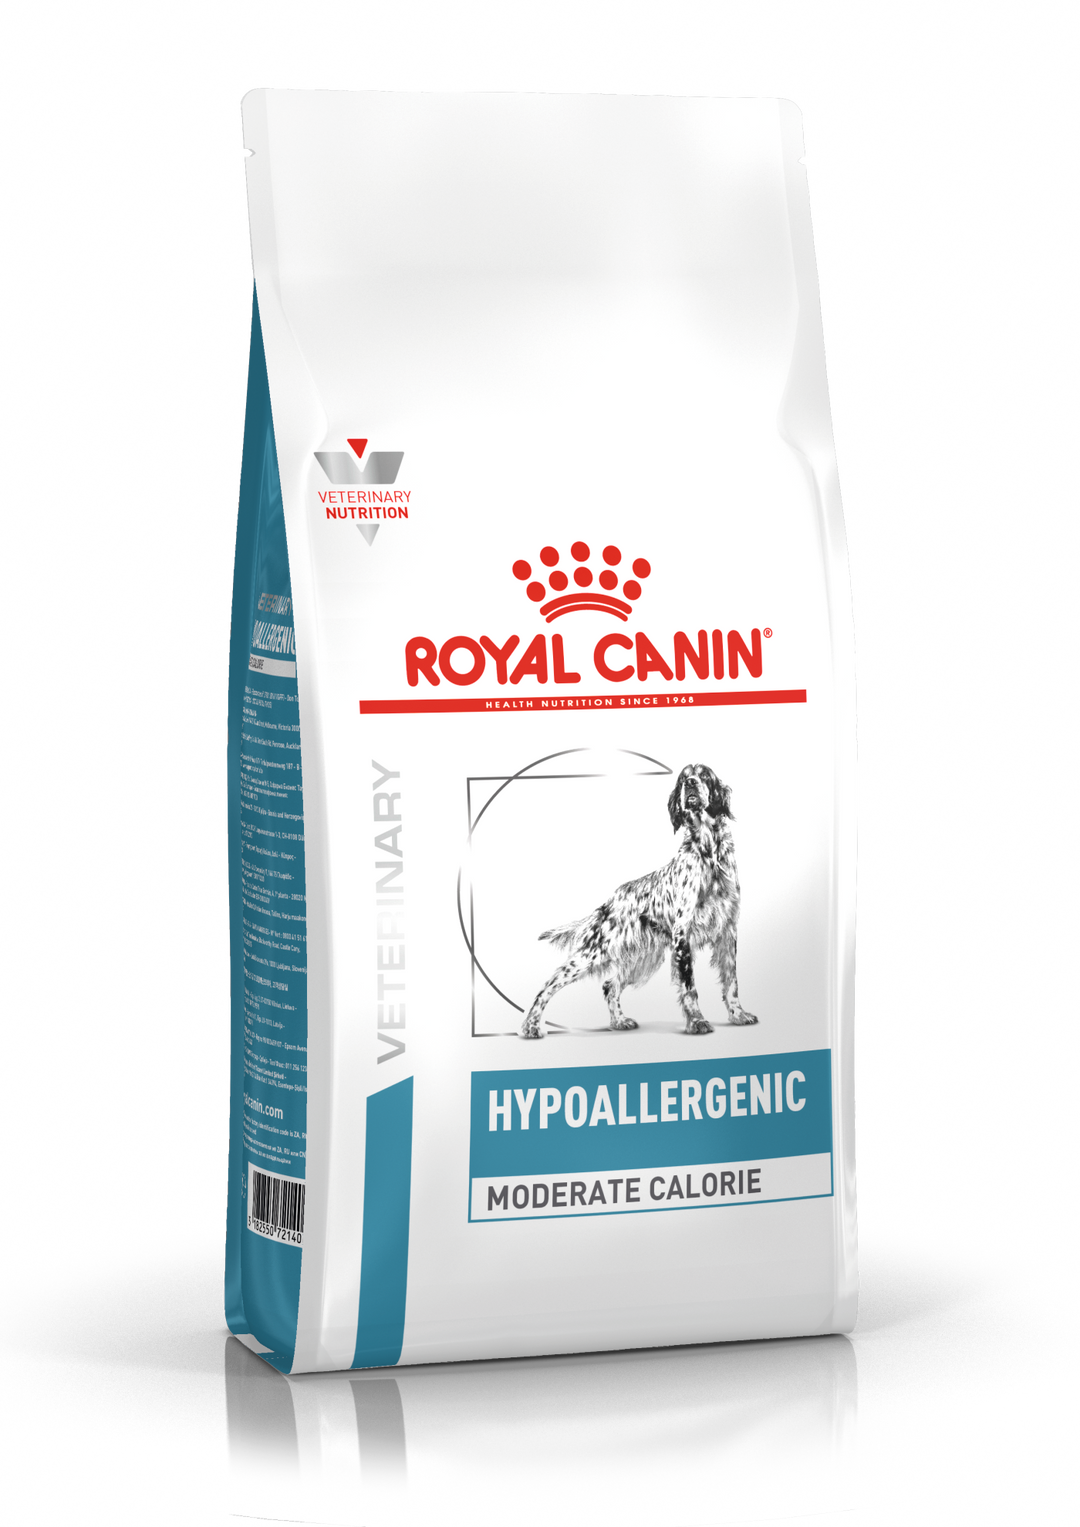 Royal Canin Hypoallergenic (Moderate Calorie) for Dogs 7kg